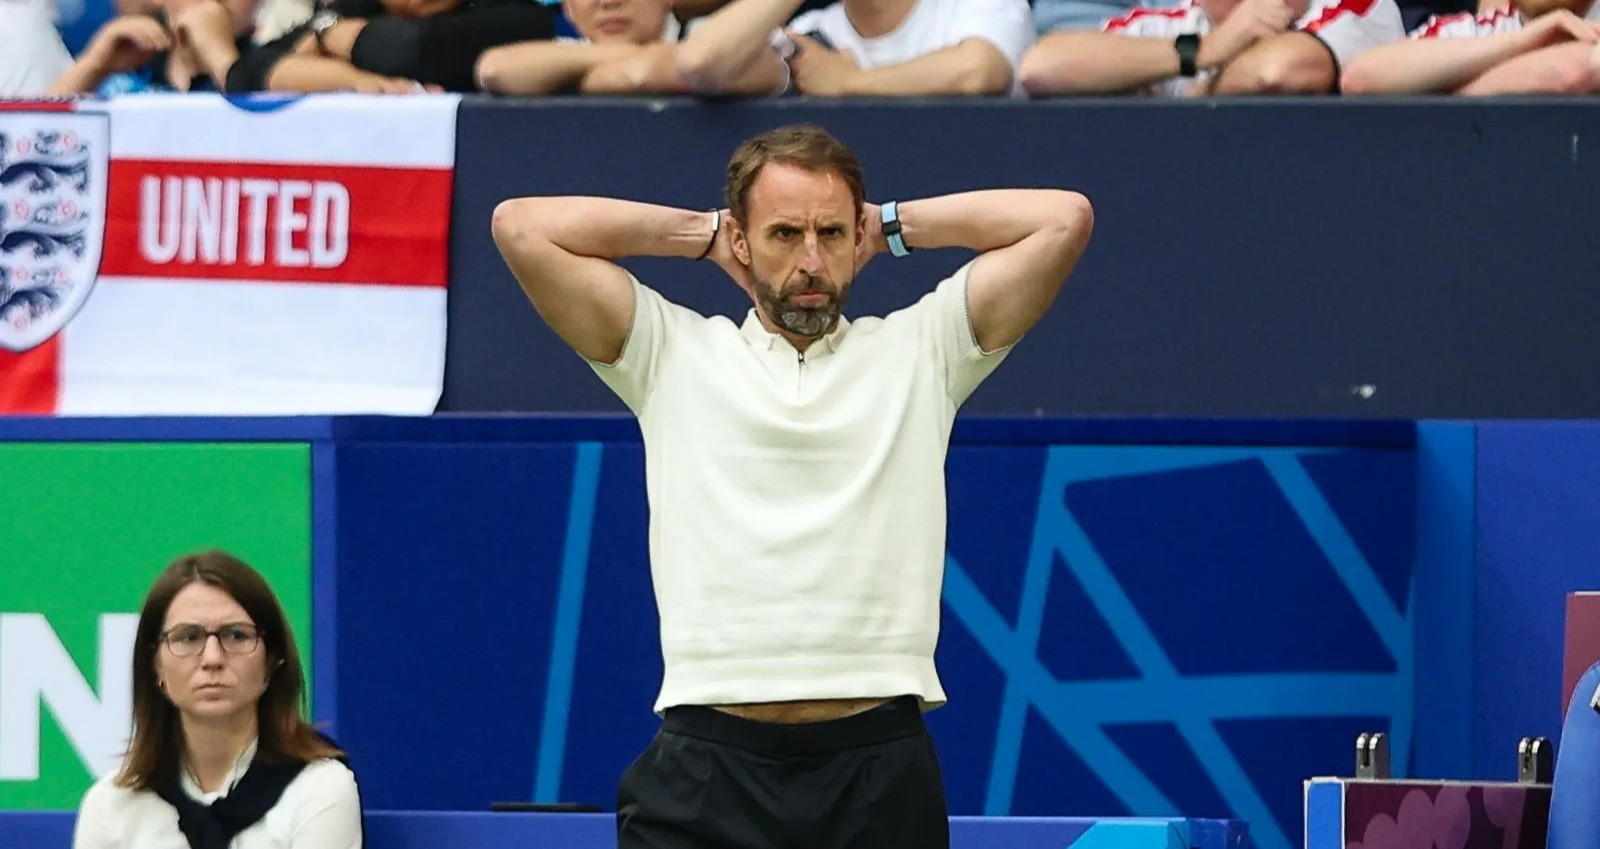 Gareth Southgate is on the brink of potentially losing his job